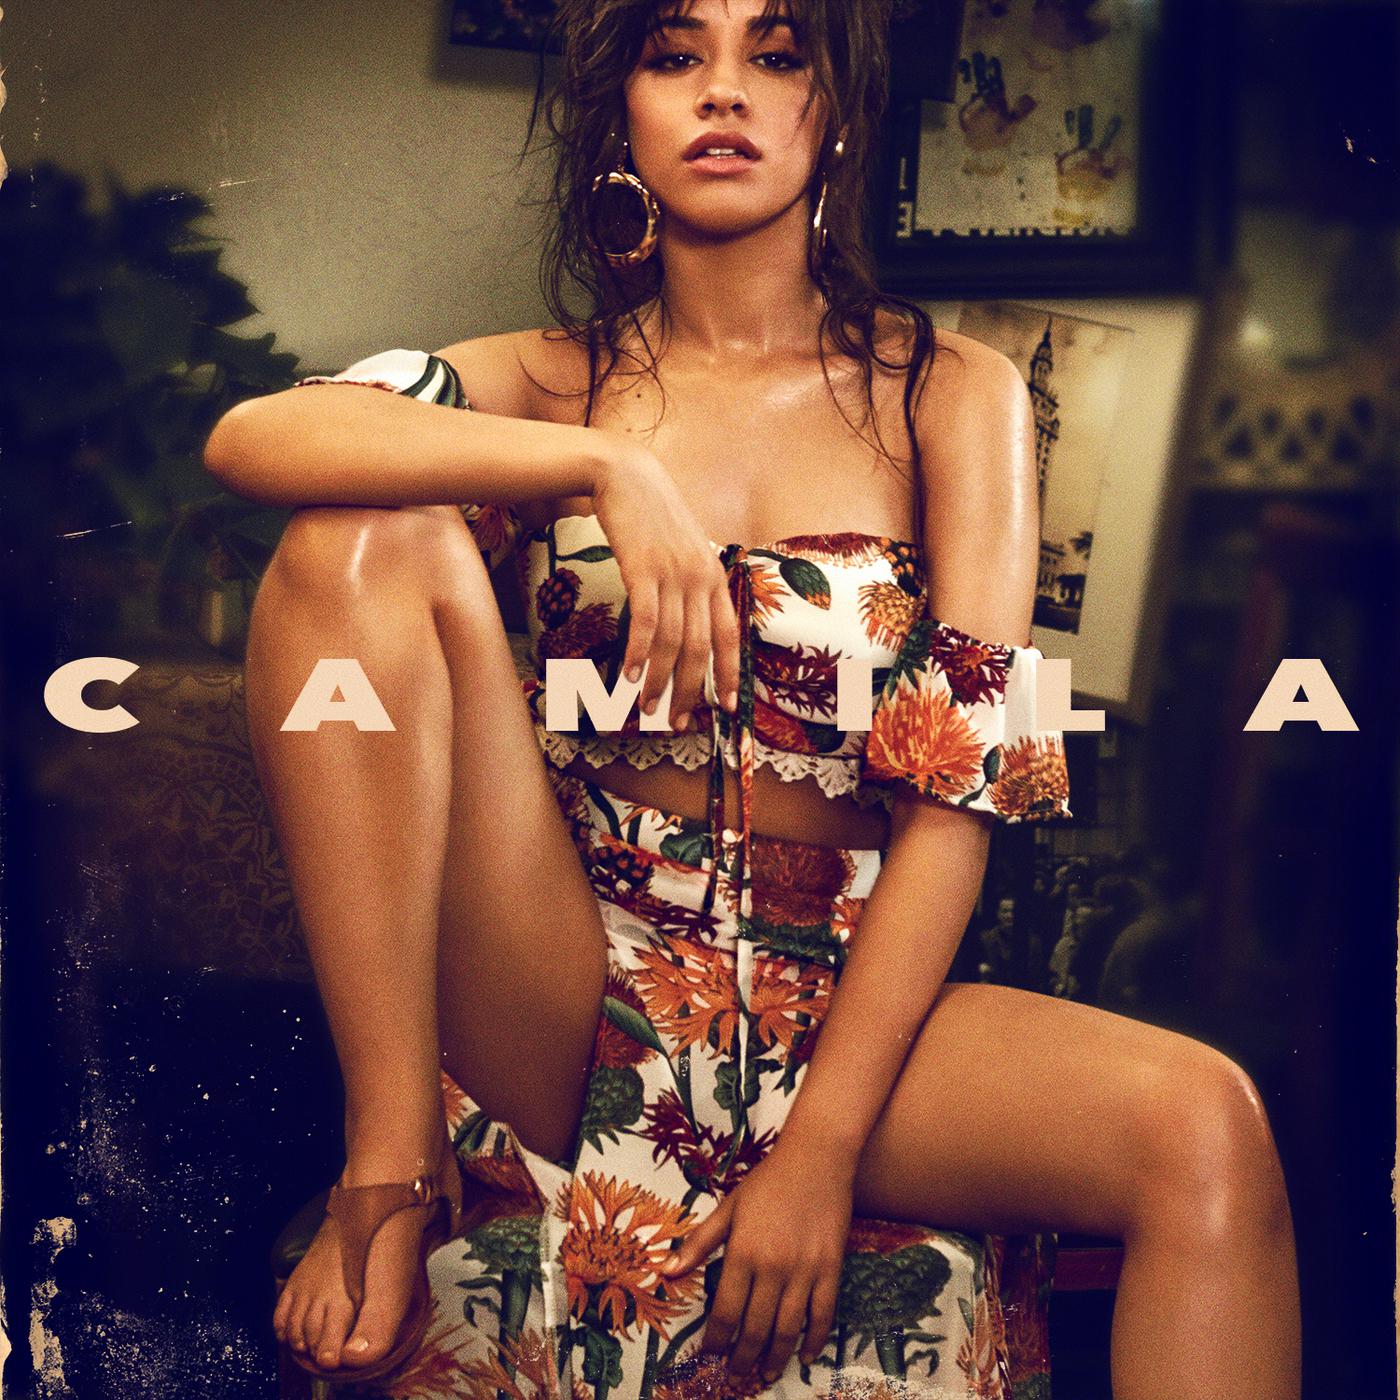 All These Years歌词 歌手Camila Cabello-专辑Camila-单曲《All These Years》LRC歌词下载